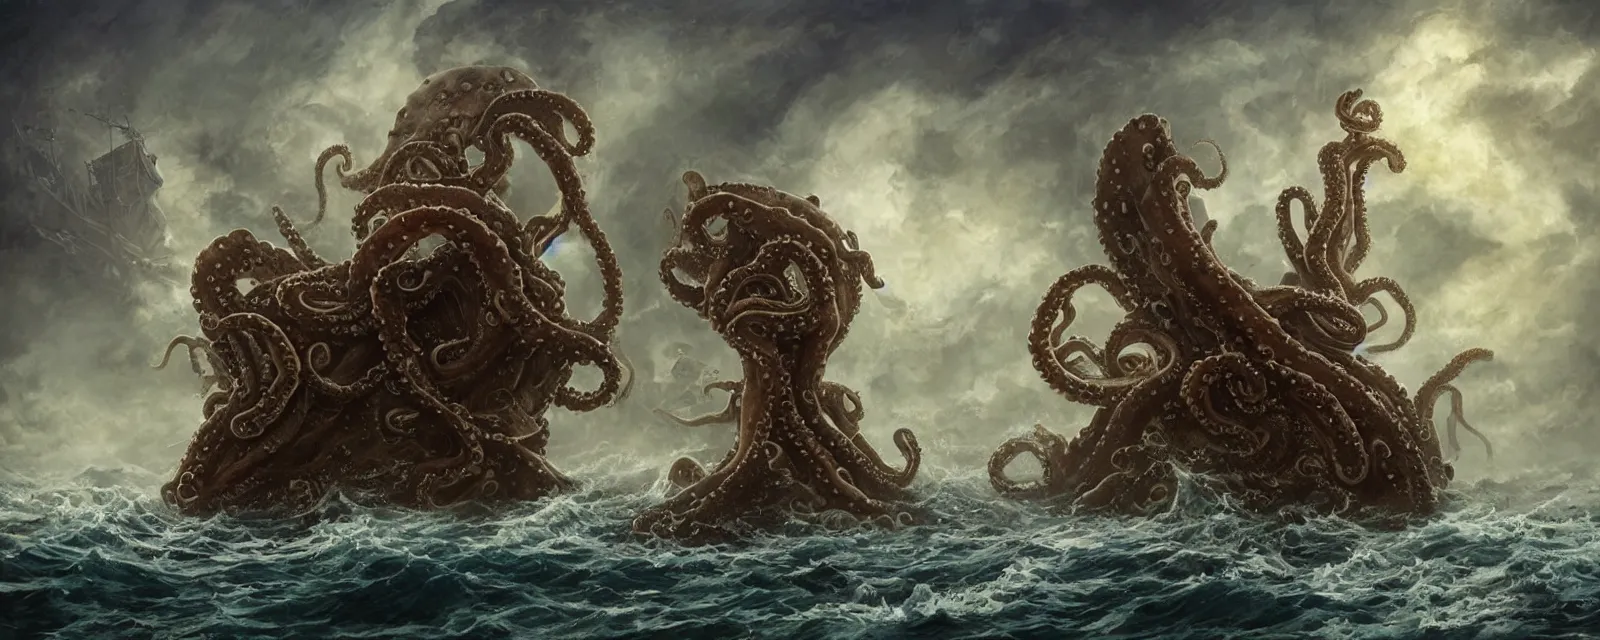 Prompt: a giant octopus is devouring a pirate ship in the wild sea, wide lens, cinematic, mist, waves, great waterfall, Eddie mendoza, ghibli, Vladimir Kush, Michael Whelan, Kay Sage, Julie Bell, Jane Graverol, Peter Mohrbacher, Ralph Bakshi, Detailed Digital Art, Airbrush, Art Nouveau, Intricate, Clear, Looming, Epic, Depth, Multi-dimensional Latent Space, Volumetric Lighting, A beautifully strange photoillustration of thunder lightning and waves, a Spanish Galleon Breaking the storm waves, by Benoit B. Mandelbrot, Gustave Dore, Martin Johnson Heade, Lee Madgwick, and Caspar David Friedrich, Sci-fi fantasy mystical ocean waves thunderstorm lightning, the Spanish Galleon in the grip of the storm, realistic painting, classical painting, high definition, digital art, matte painting, very detailed, realistic, Unreal Engine, octane render, vray, 4k, super wide angle